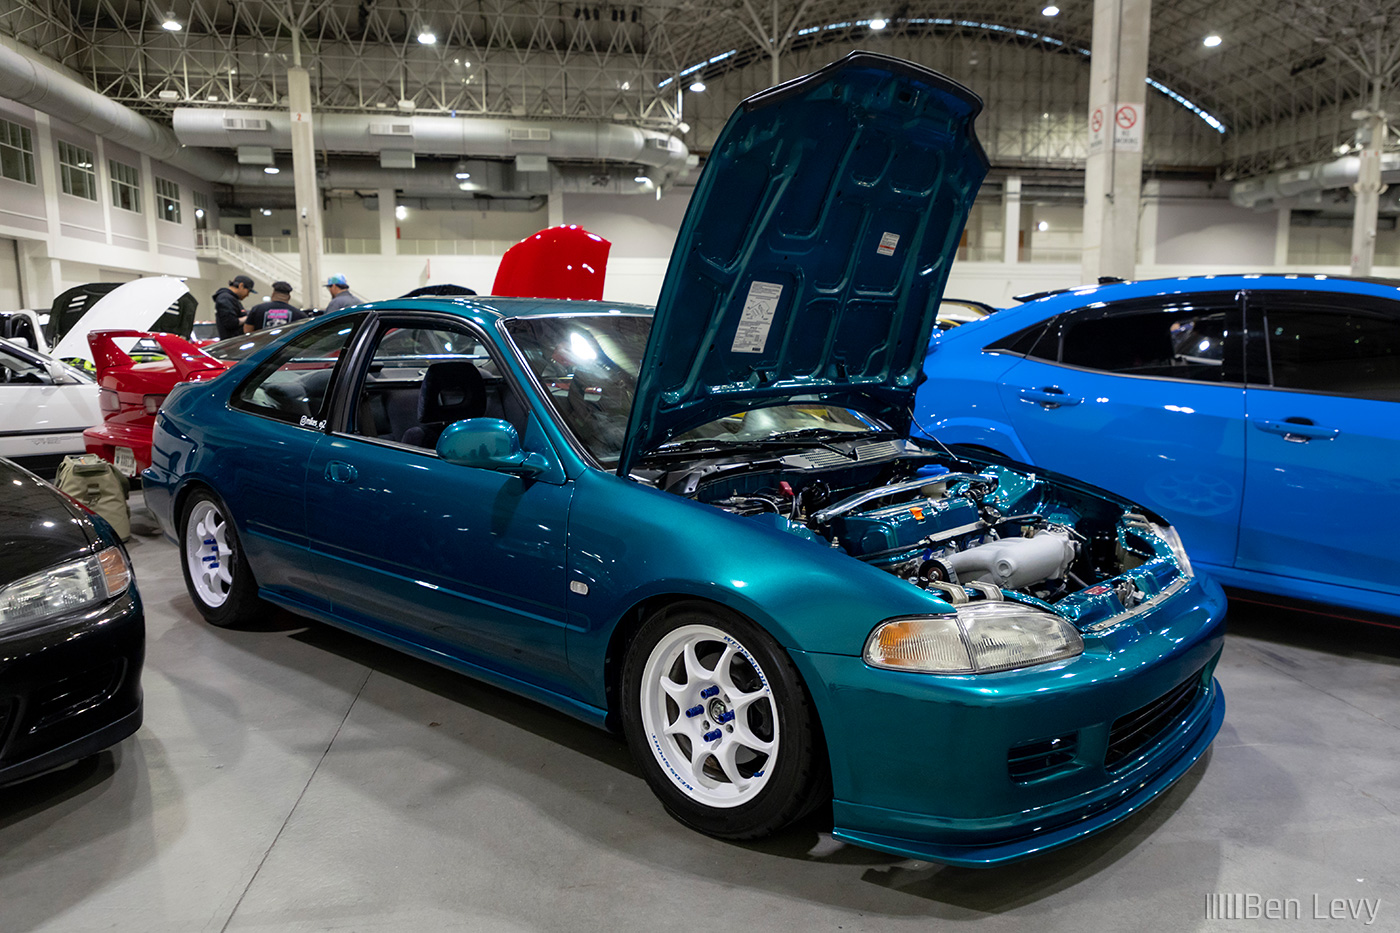 Teal Honda Civic Coupe at Wekfest Chicago